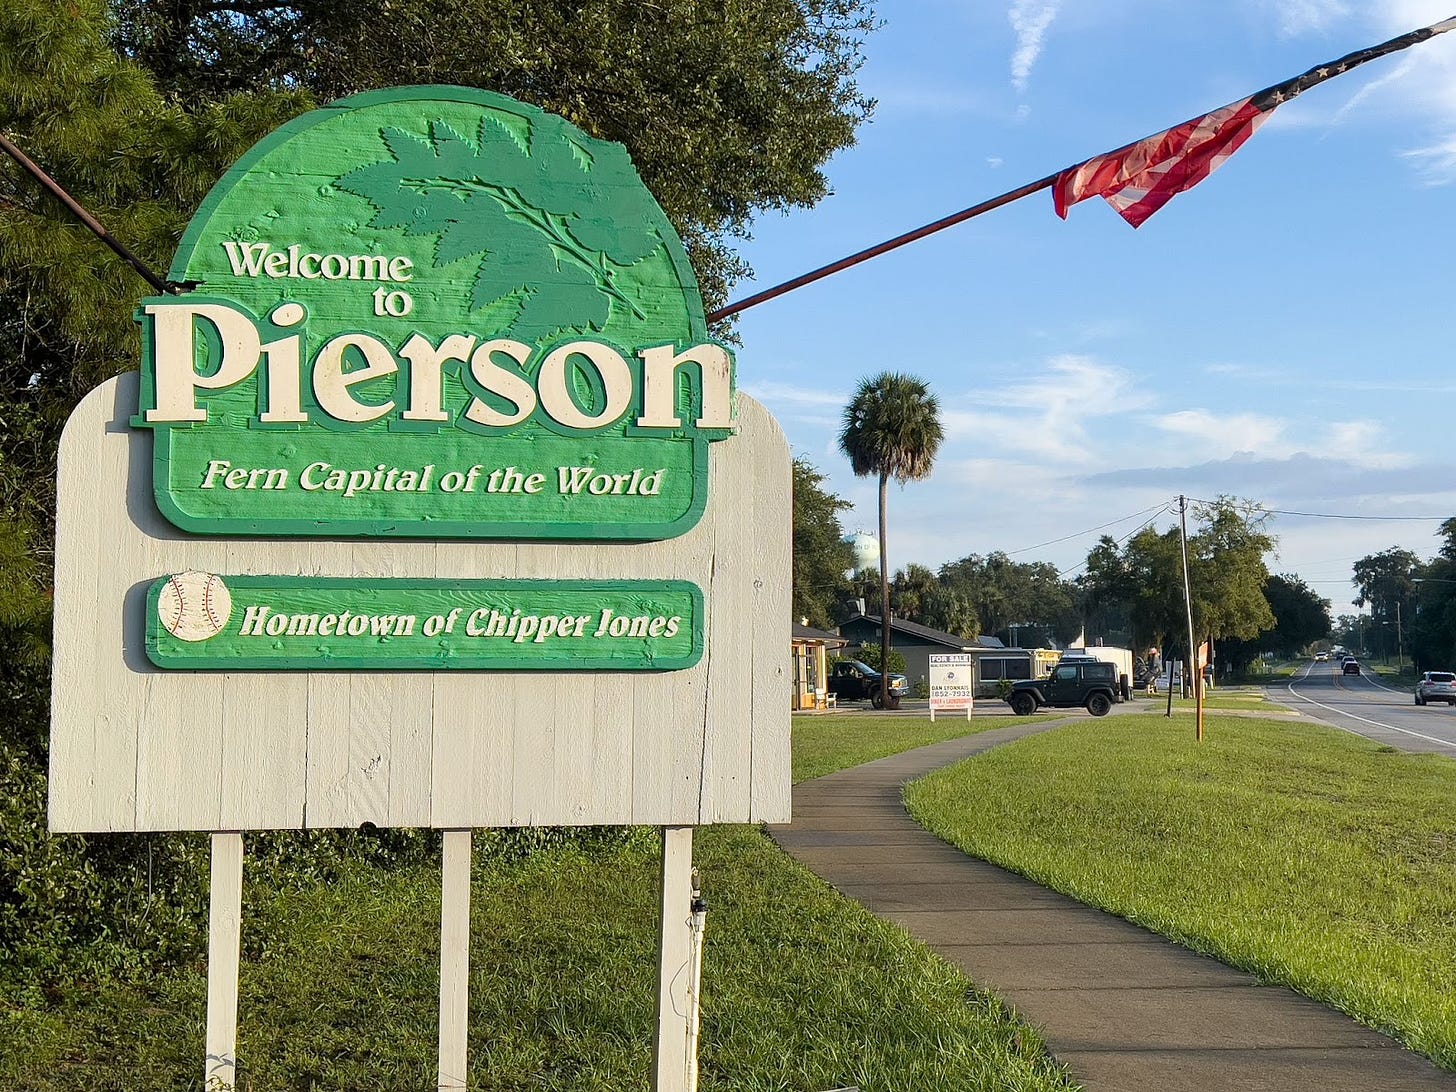 A welcome sign in Pierson, Florida, describes the community as the “fern capital of the world.” (Photo by Jennifer Taylor)